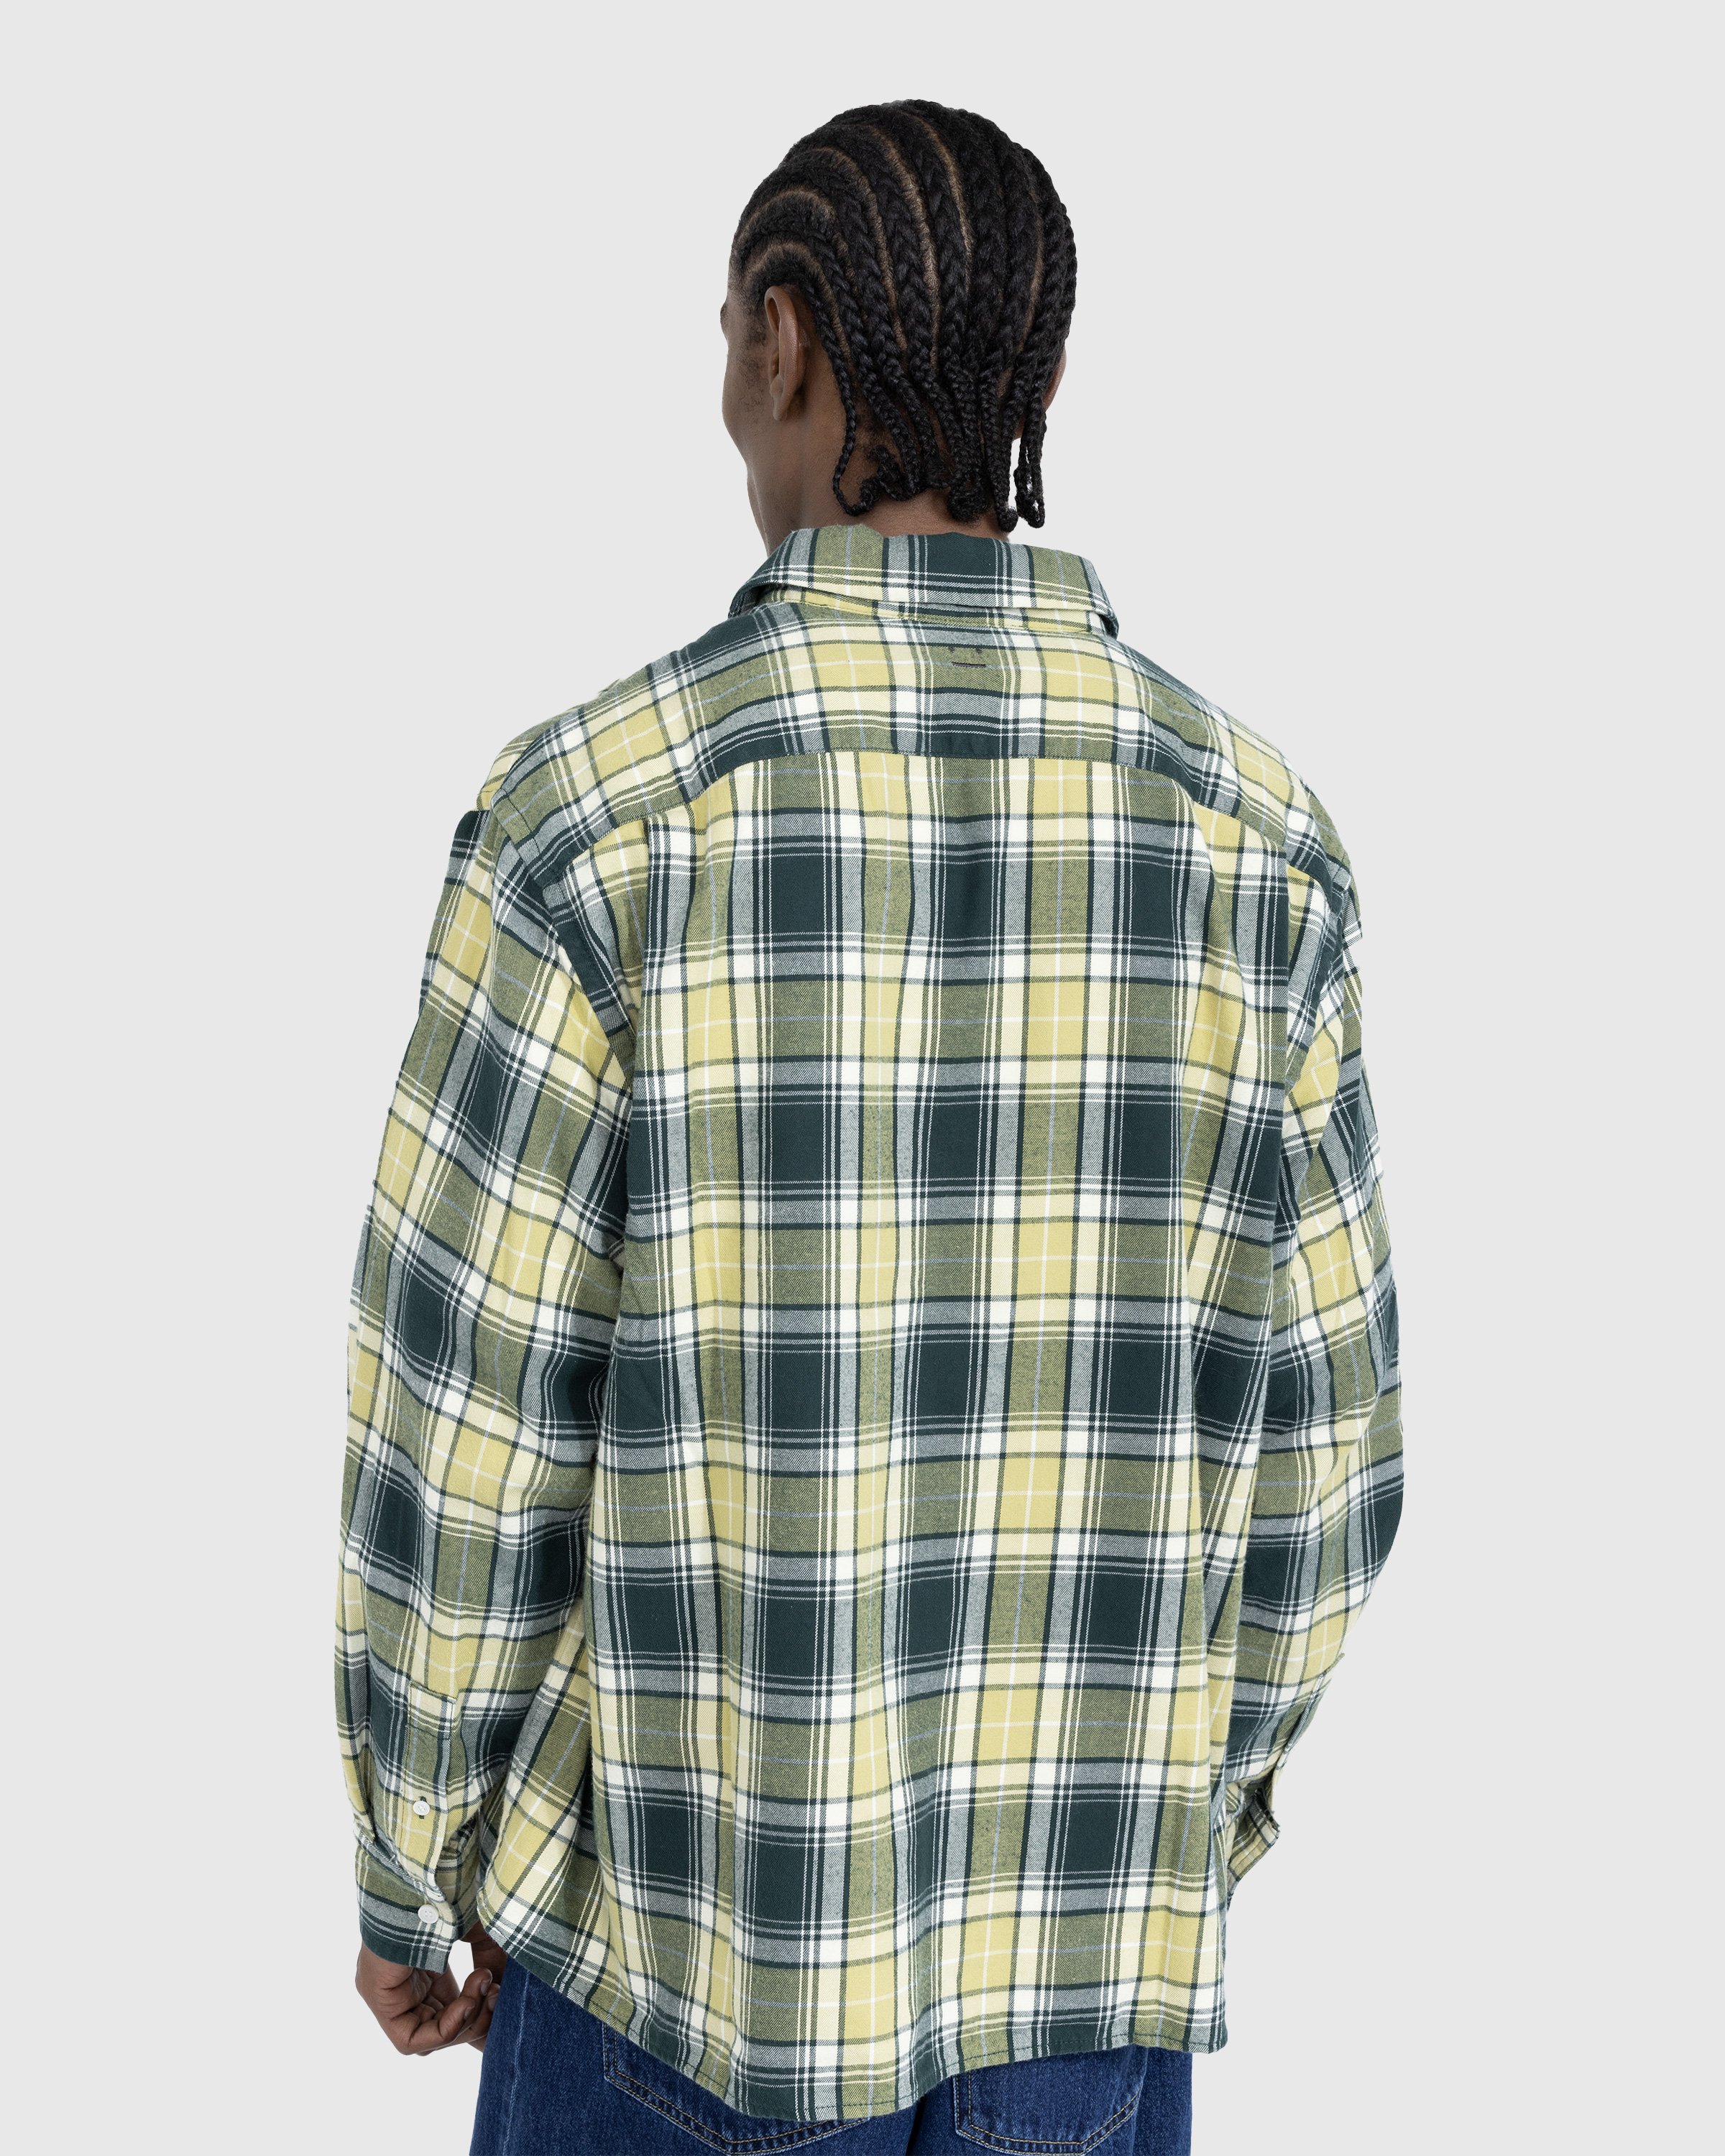 Acne Studios - Check Button-Up Shirt Forest Green/Light Green - Clothing - Green - Image 3